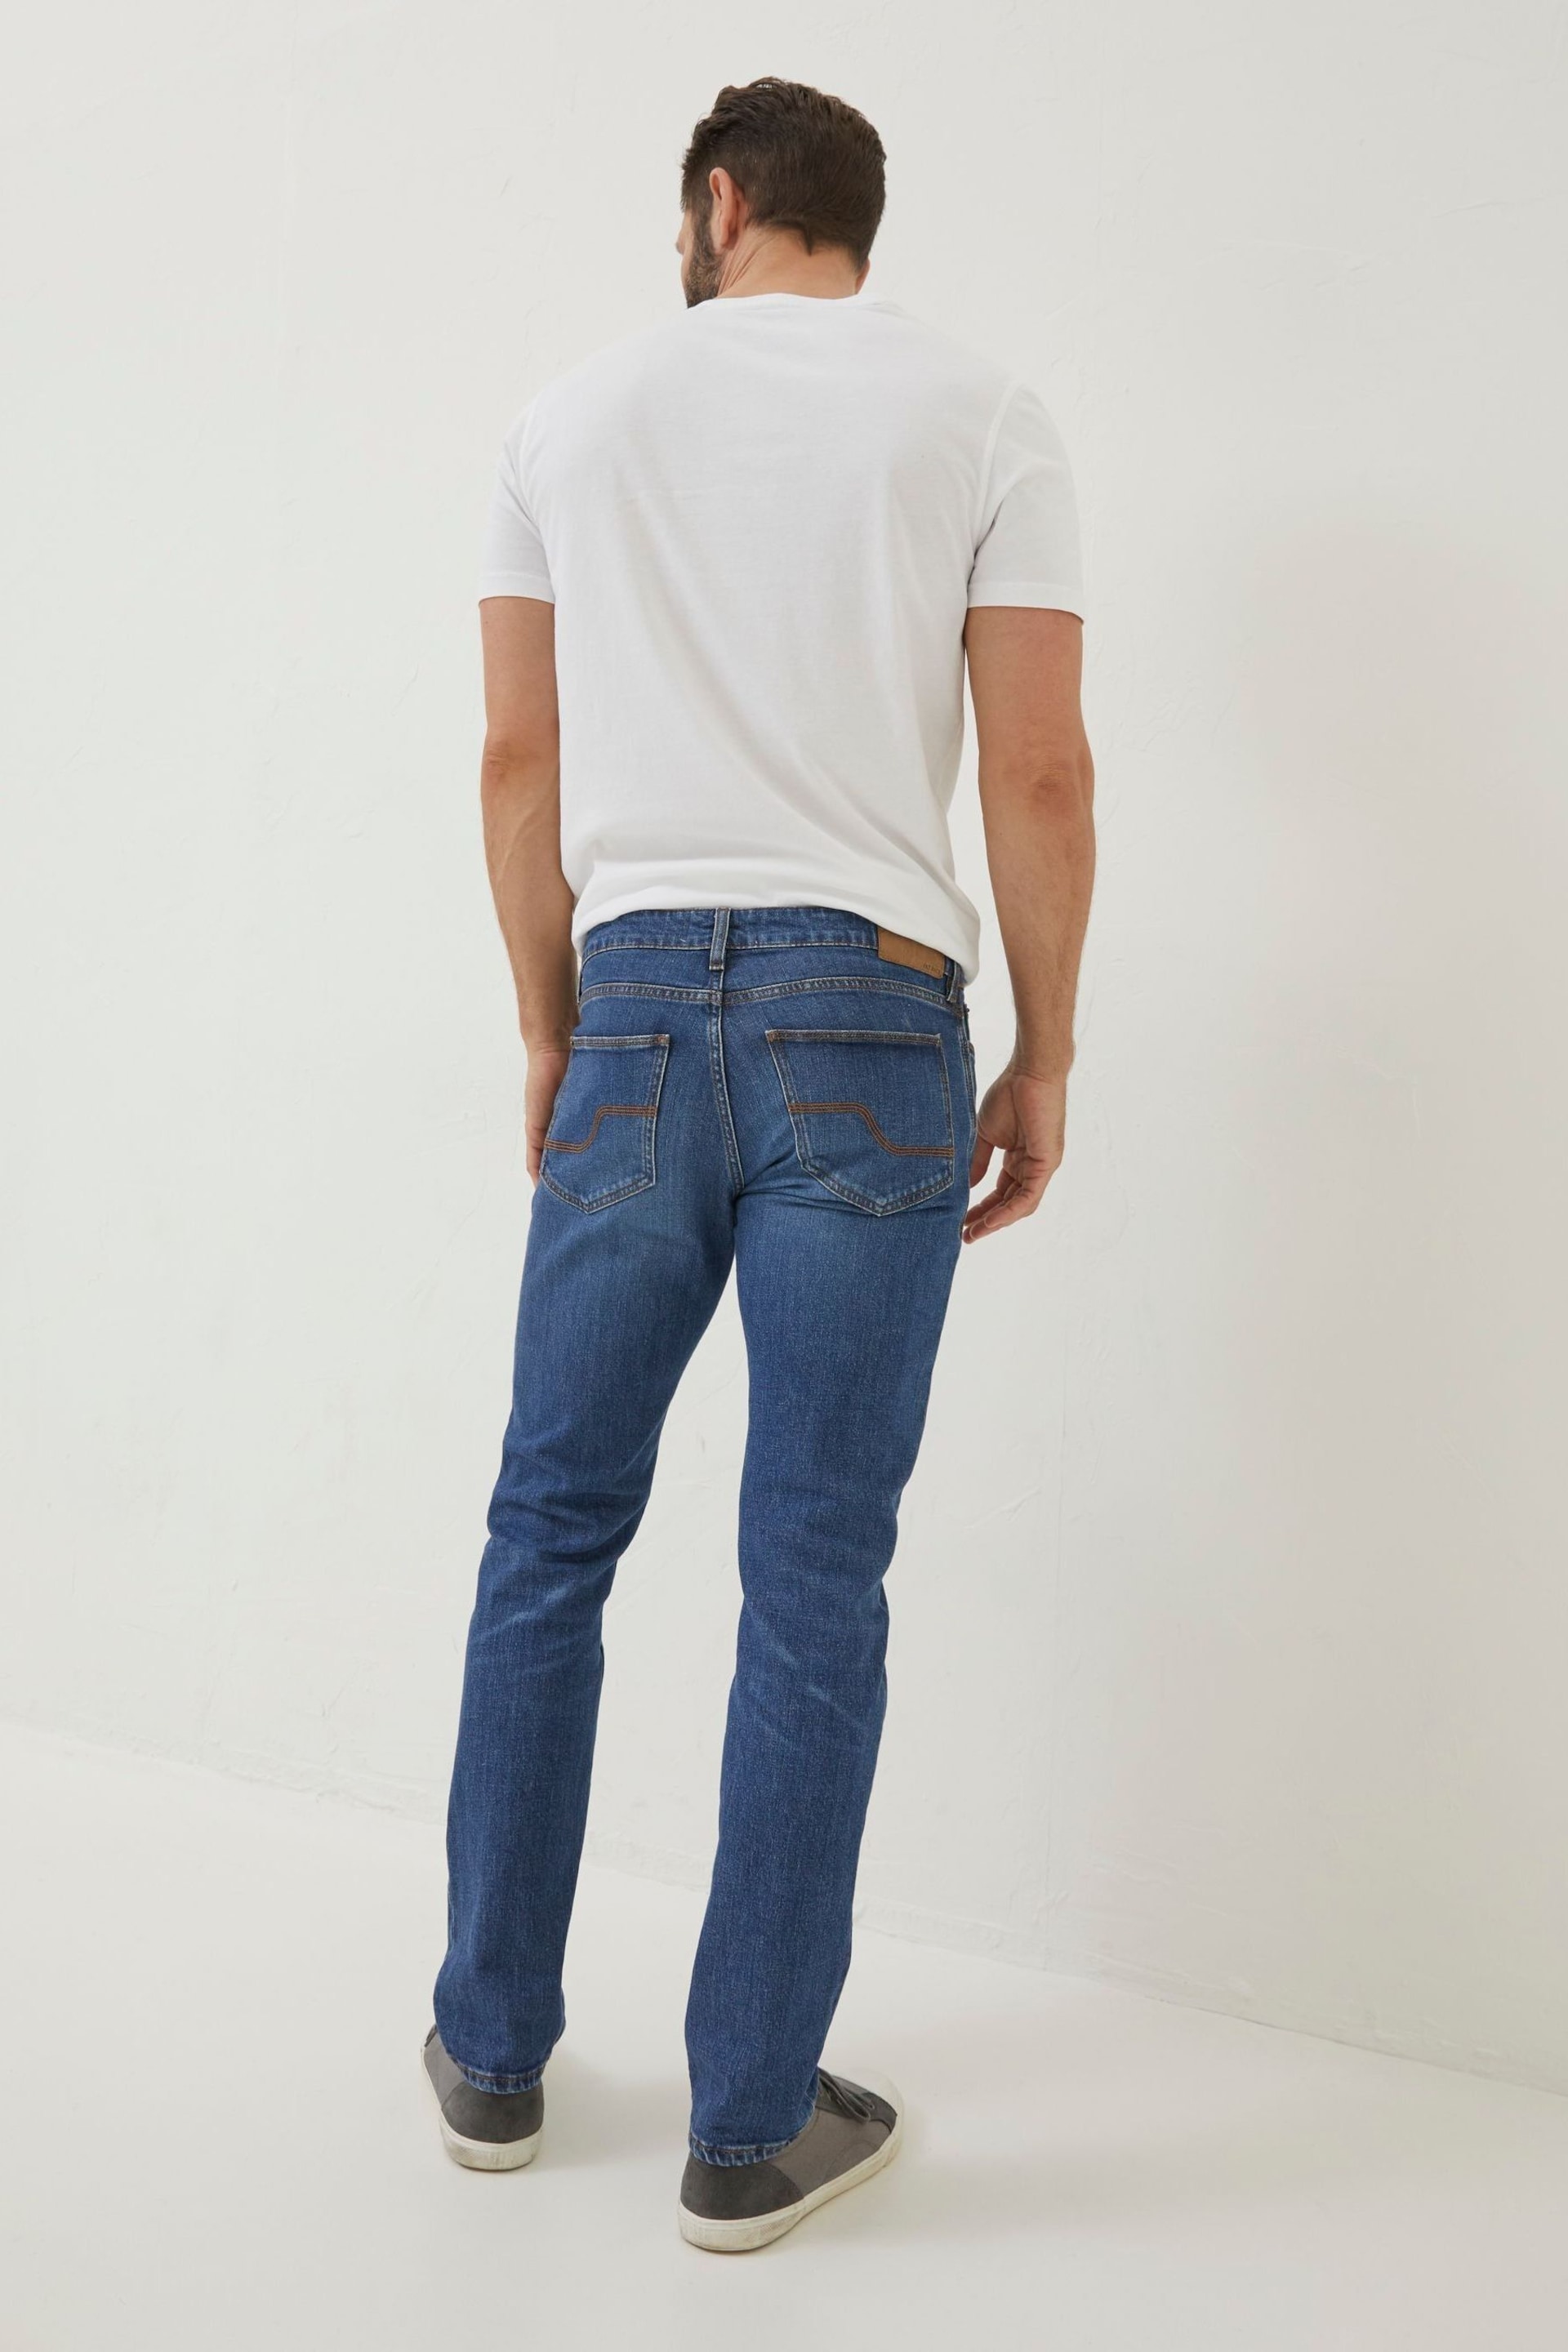 FatFace Blue Slim Mid Wash Jeans - Image 2 of 4